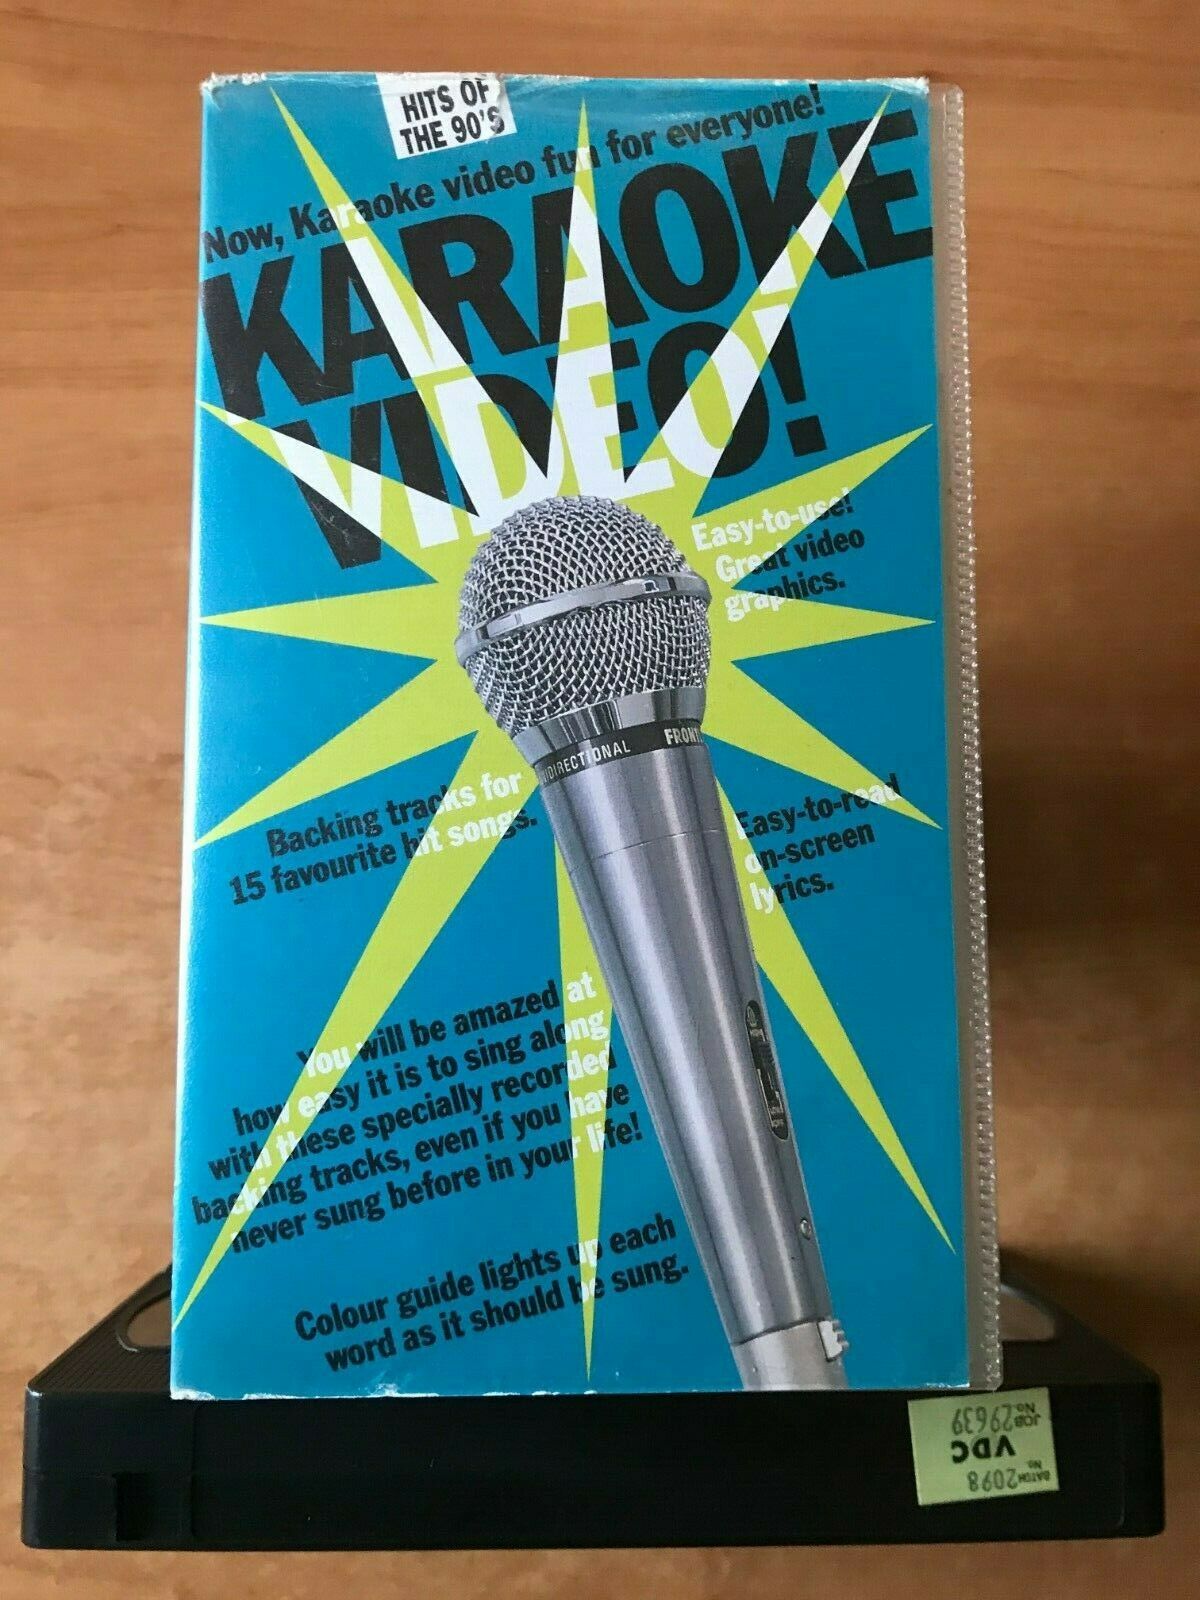 Karaoke Video: Hits Of 90's - 'I Will Always Love You' - 'Crazy' - Music - VHS-